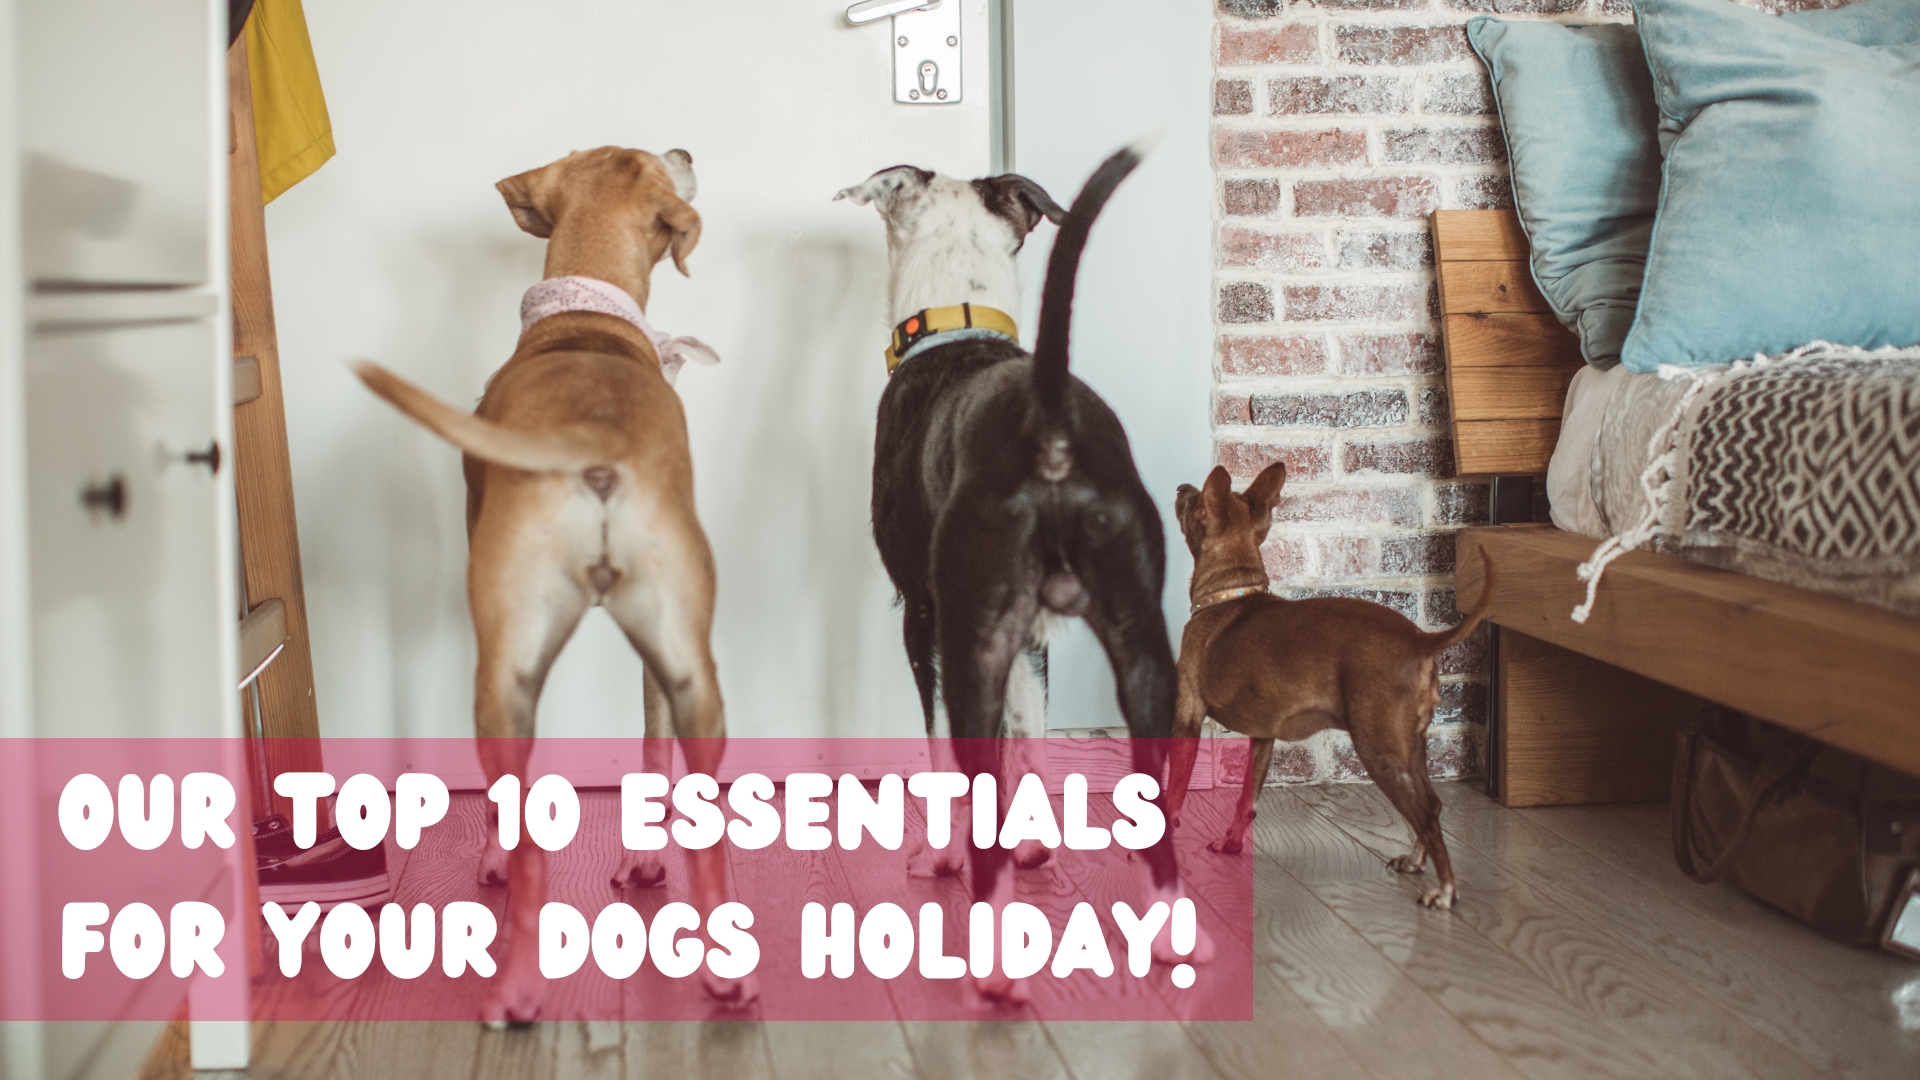 Our top 10 essentials for your dogs holiday!